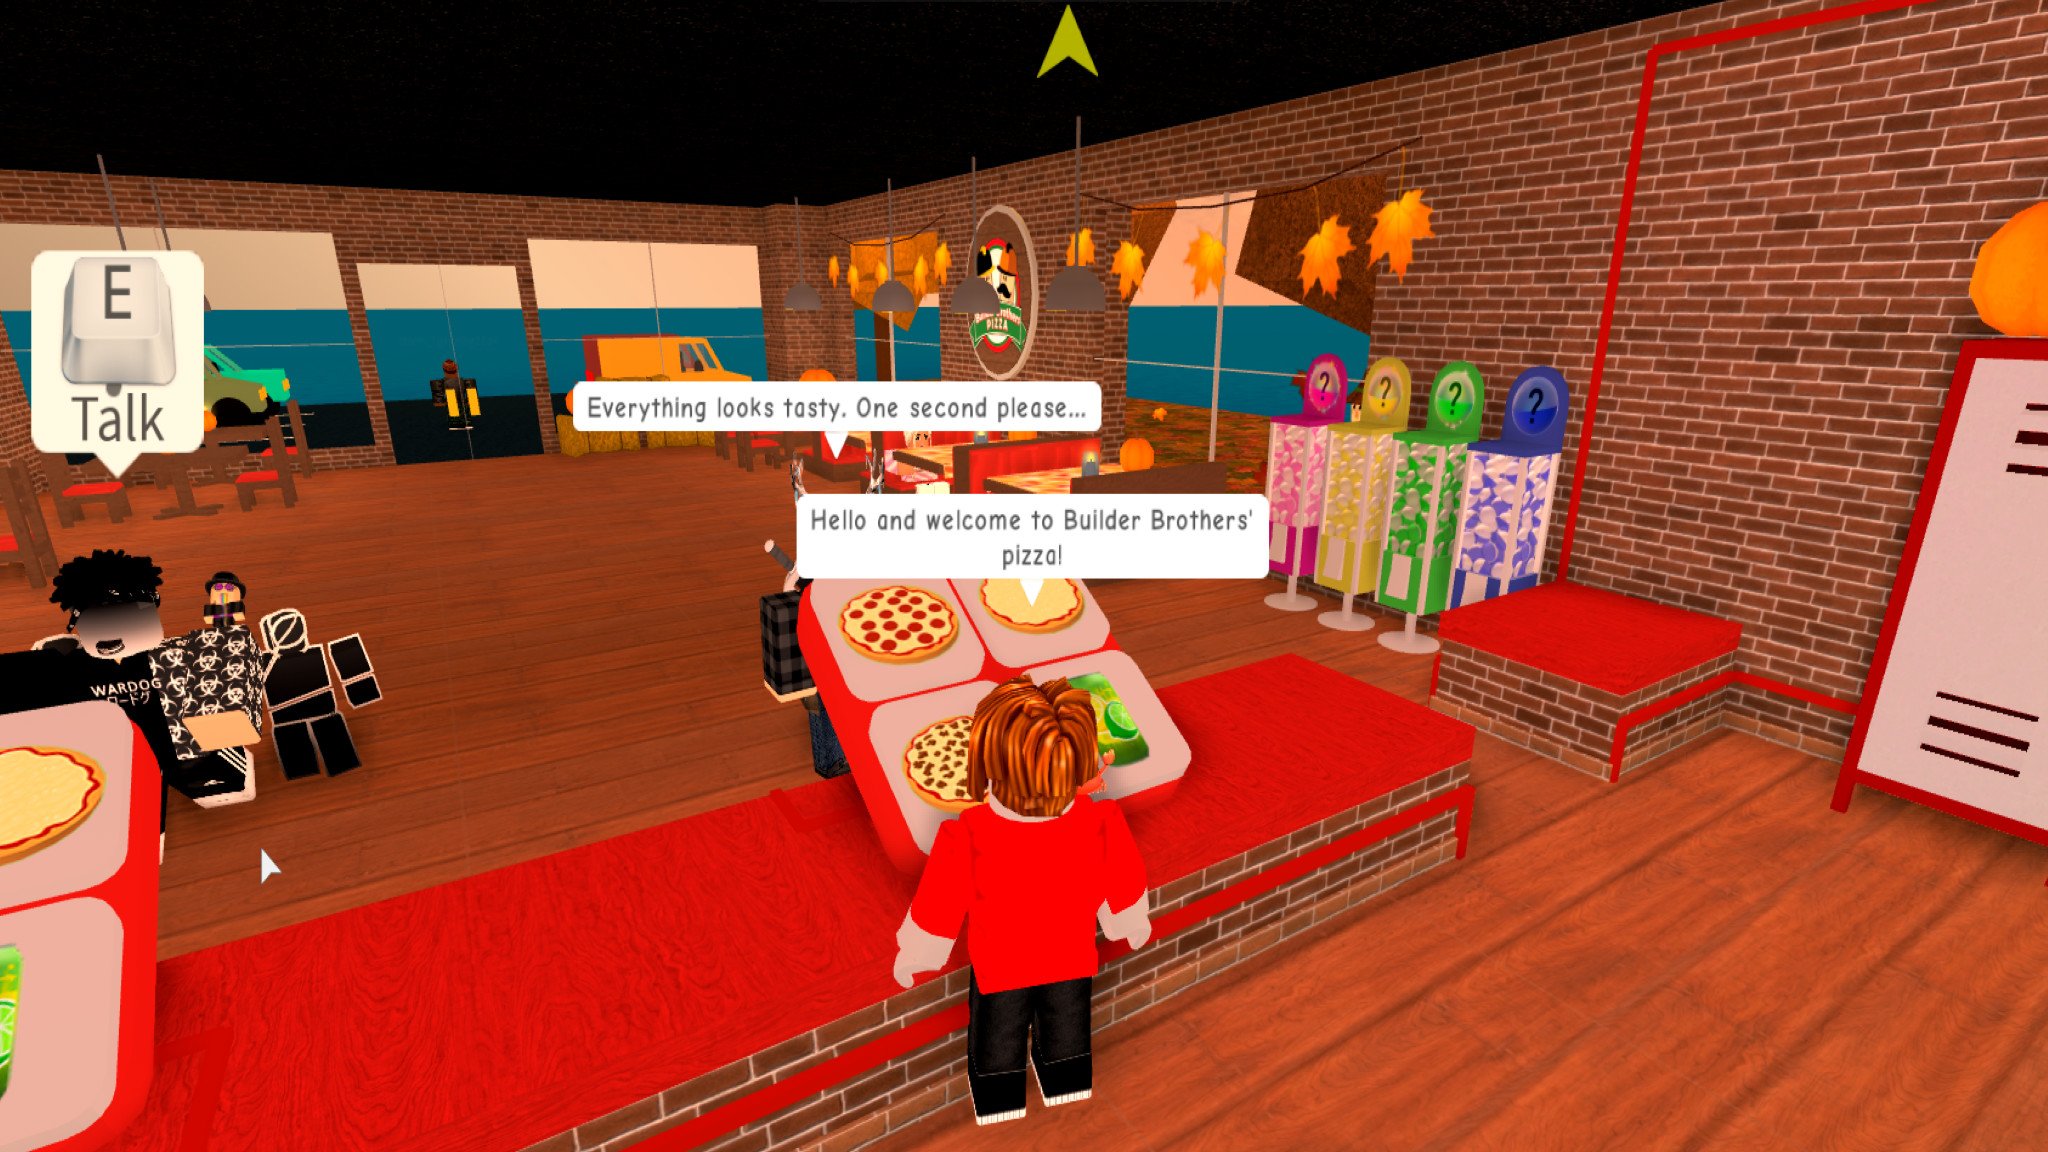 Best Games To Play In Roblox Android Central - roblox games like work at a pizza place